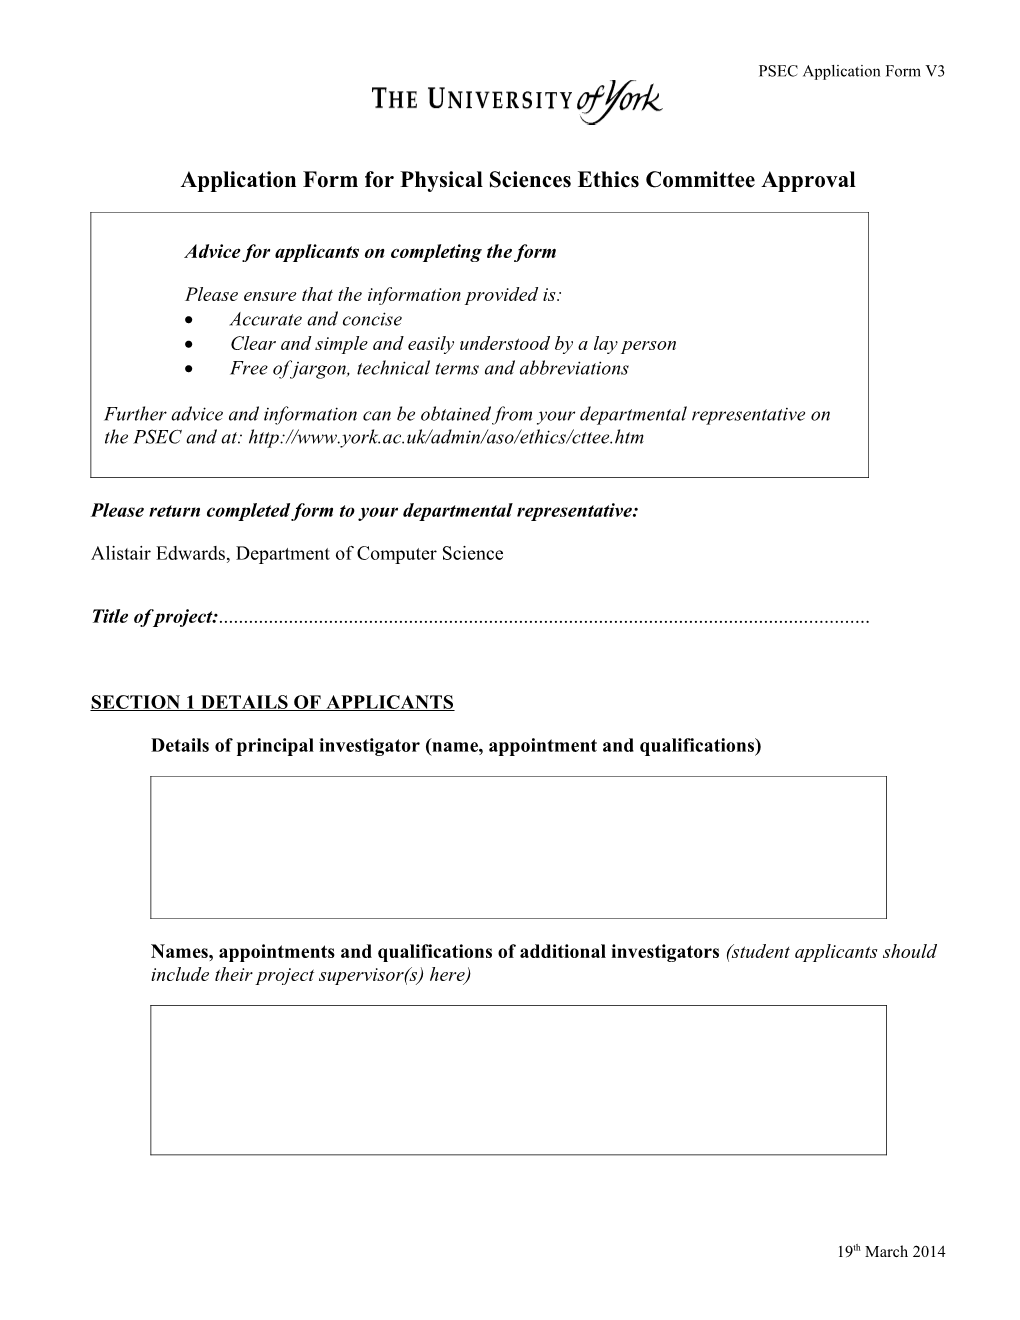 Application Form for Ethics Committee Approval